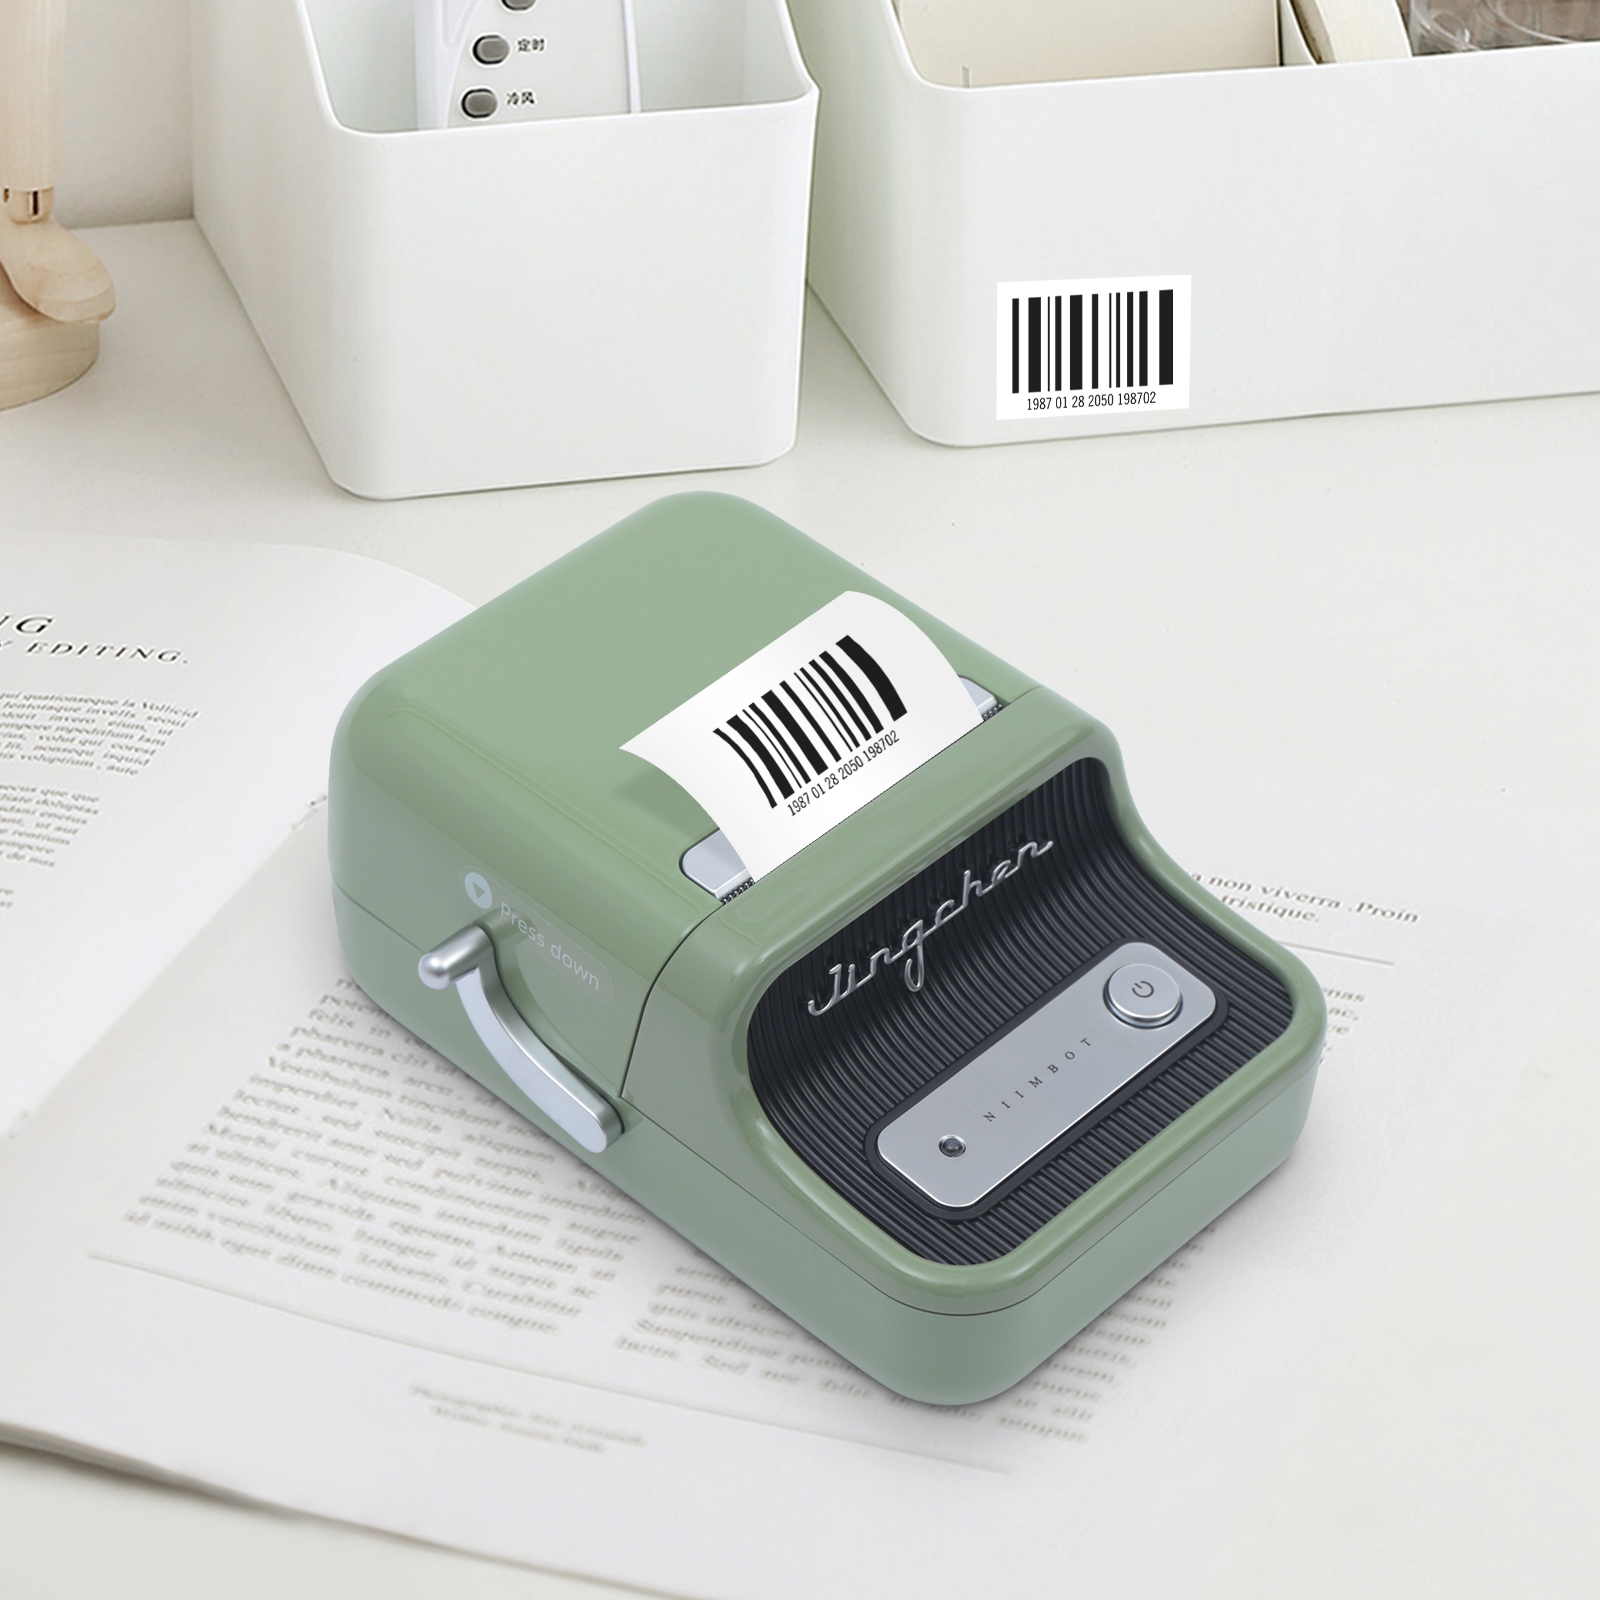 Loyalheartdy Thermal Label Printer Bluetooth Portable Green ABS PVC Label  Maker Machine with Roll Tape for Home, Office